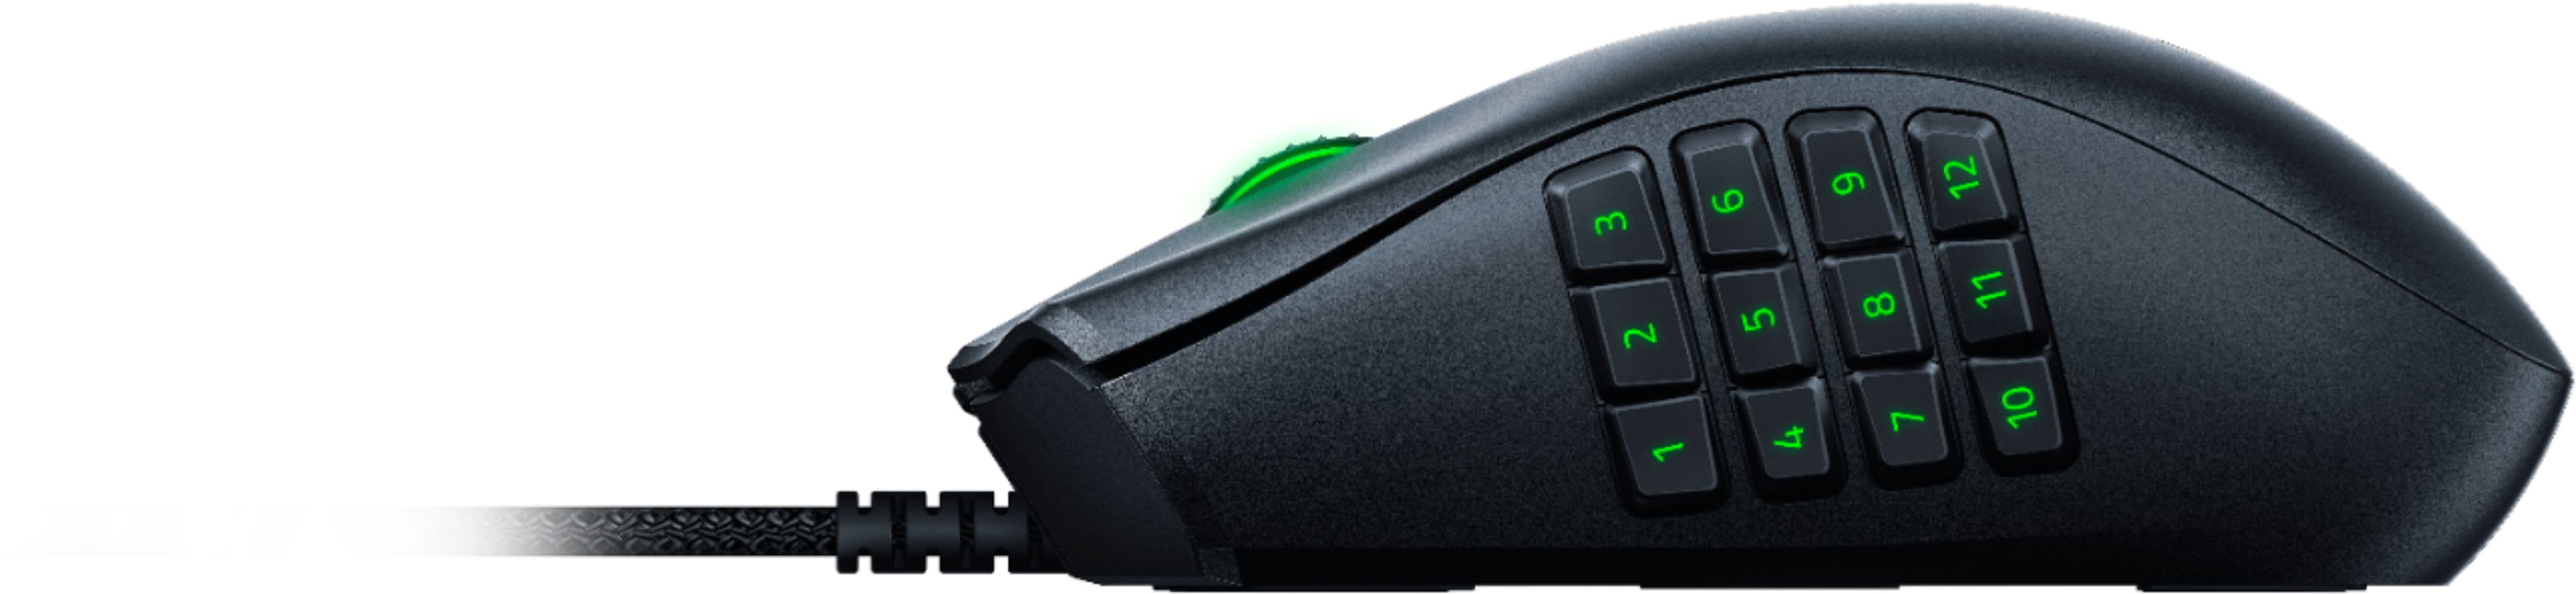 Left View: Razer - Firefly V2 Hard Surface Gaming Mouse Pad with Chroma RGB Lighting - Black